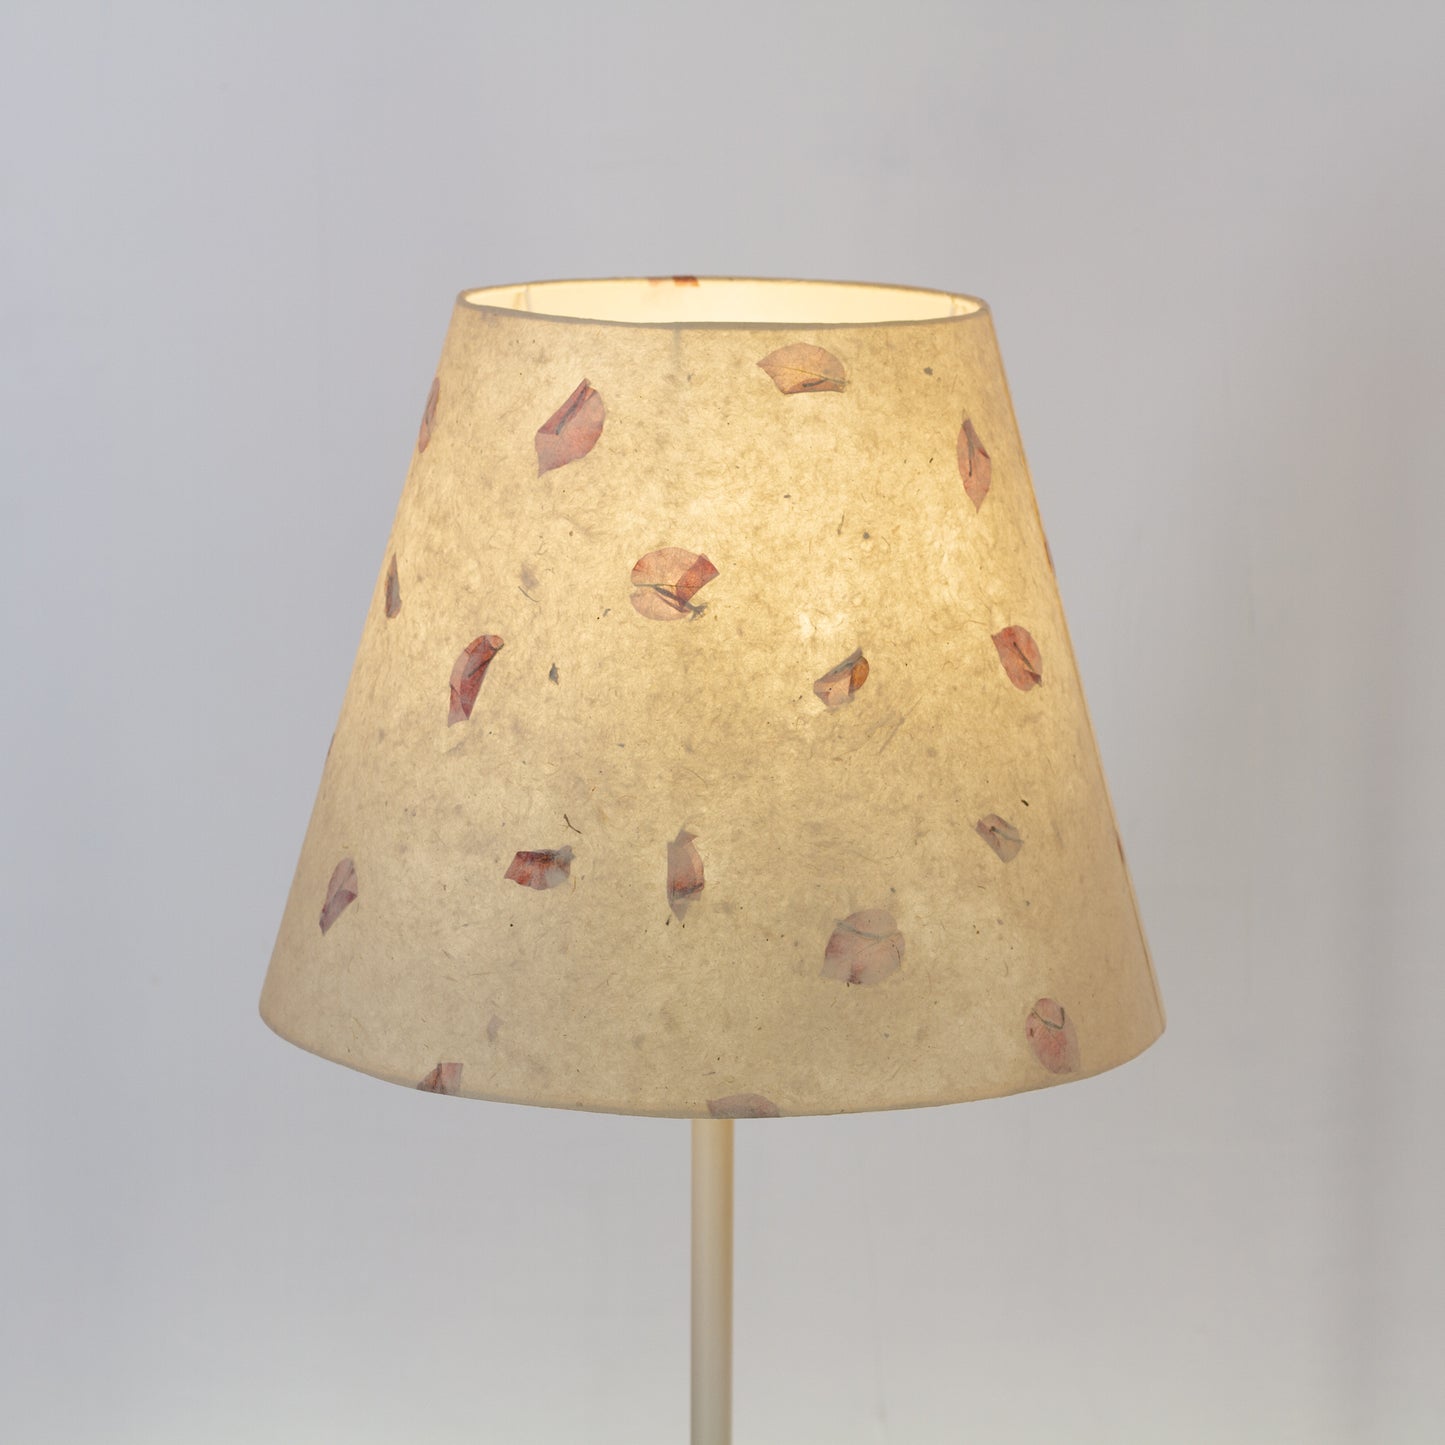 Conical Lamp Shade P33 - Rose Petals on Natural Lokta, 23cm(top) x 40cm(bottom) x 31cm(height)